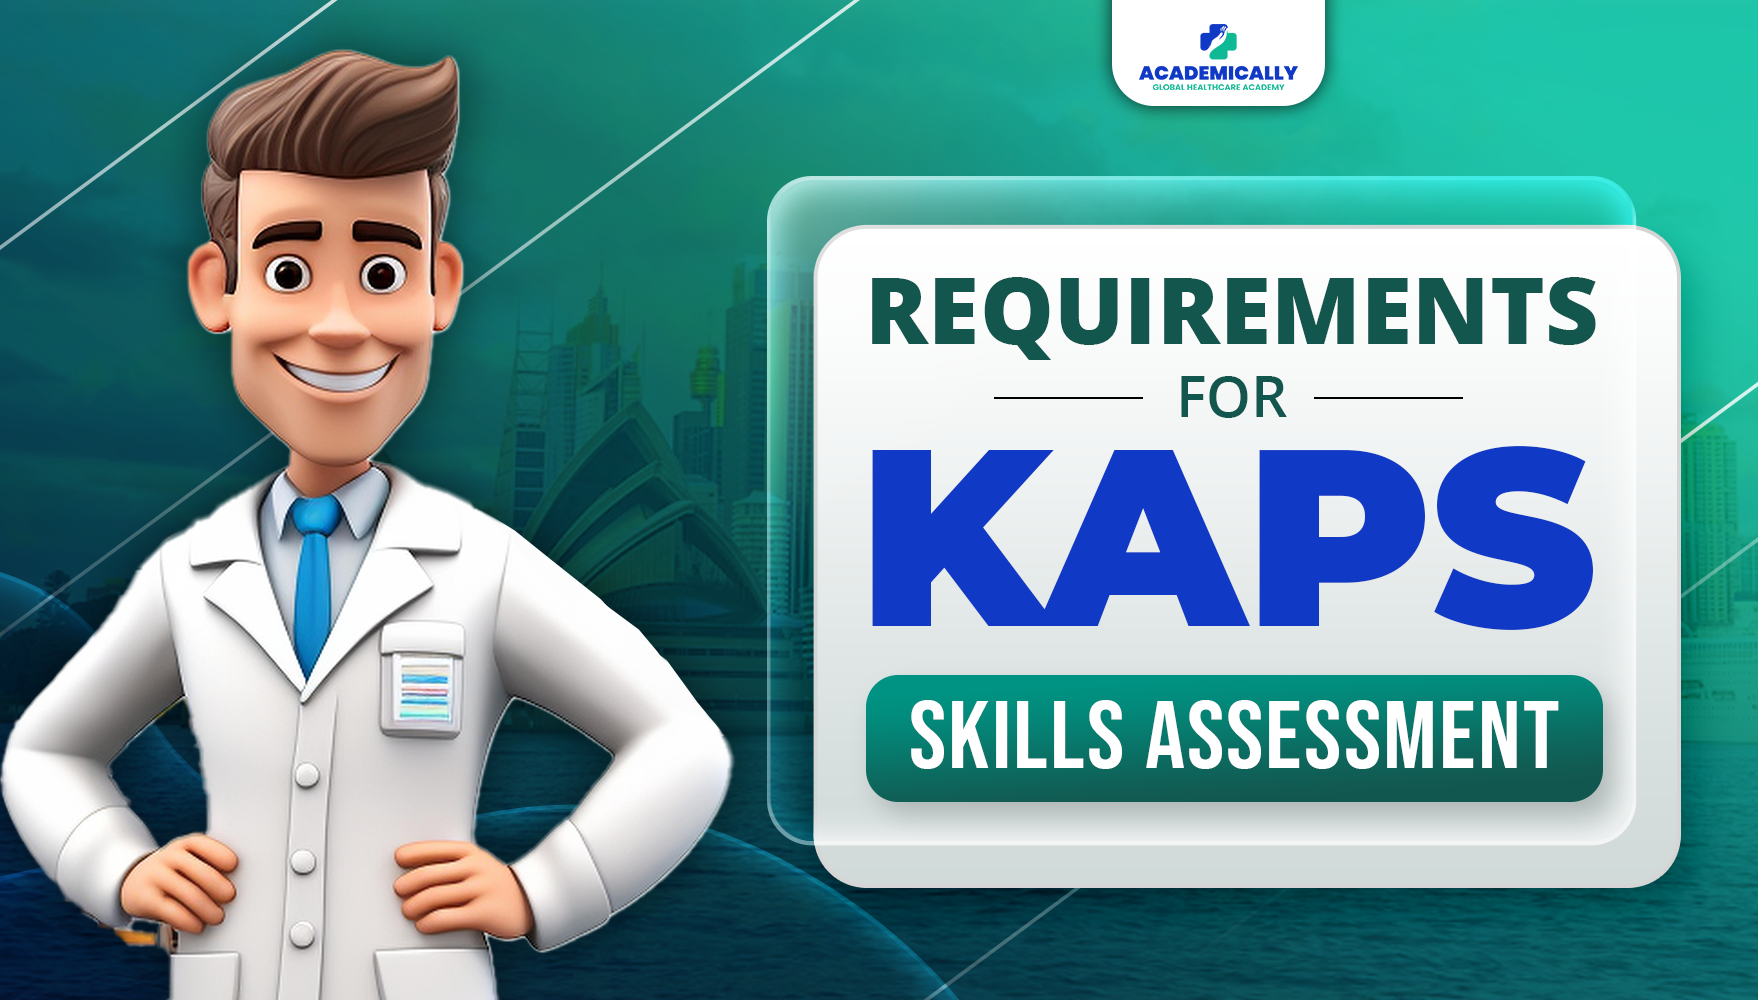 Requirements for KAPS Skills Assessment